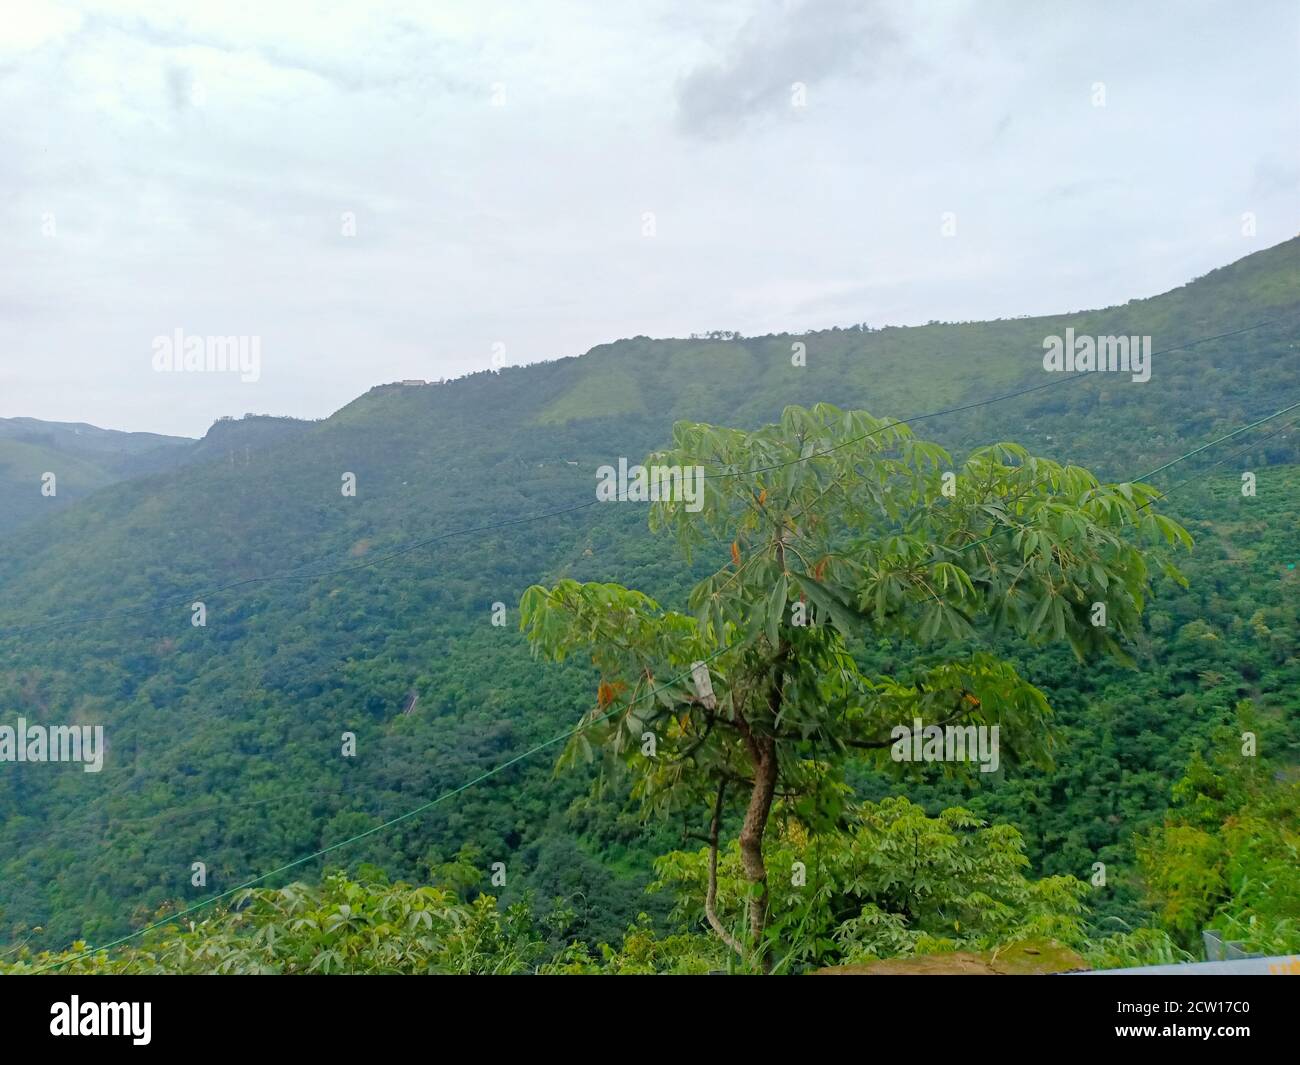 a high range mountain and trees a view from idukki india Stock Photo